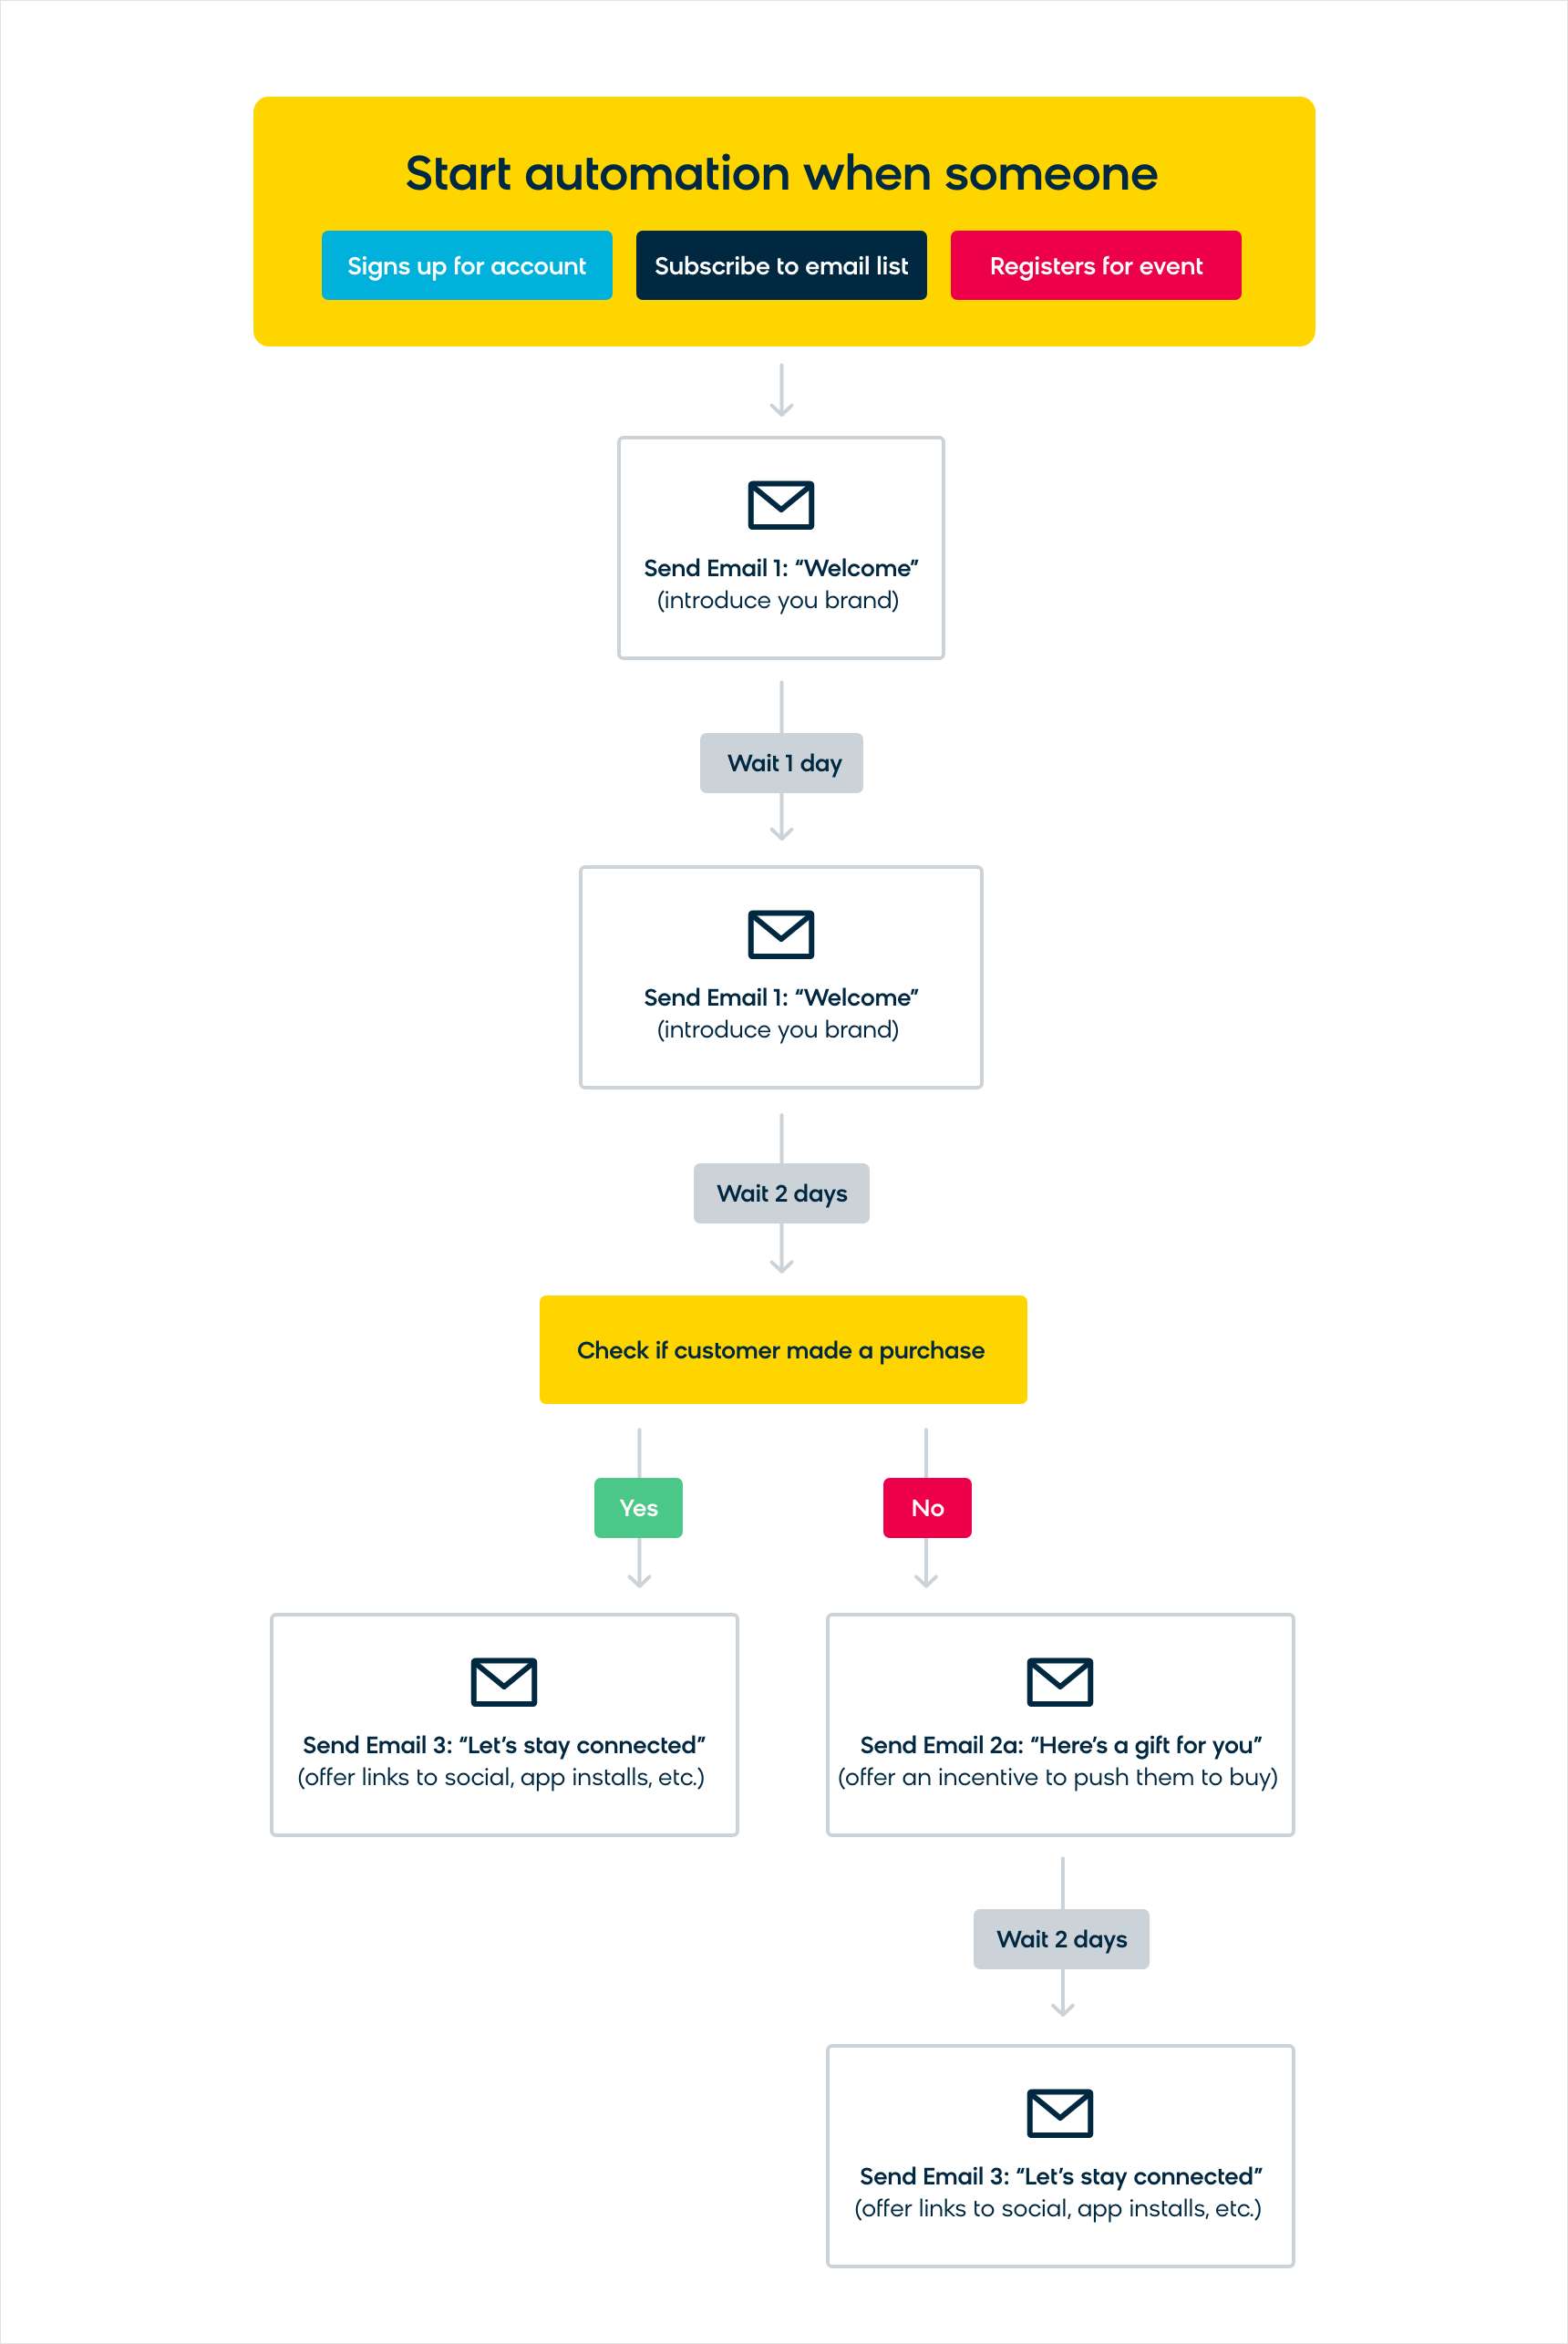 a mapped out blueprint for a personalized welcome email series that marketers can implement in their email marketing campaigns.